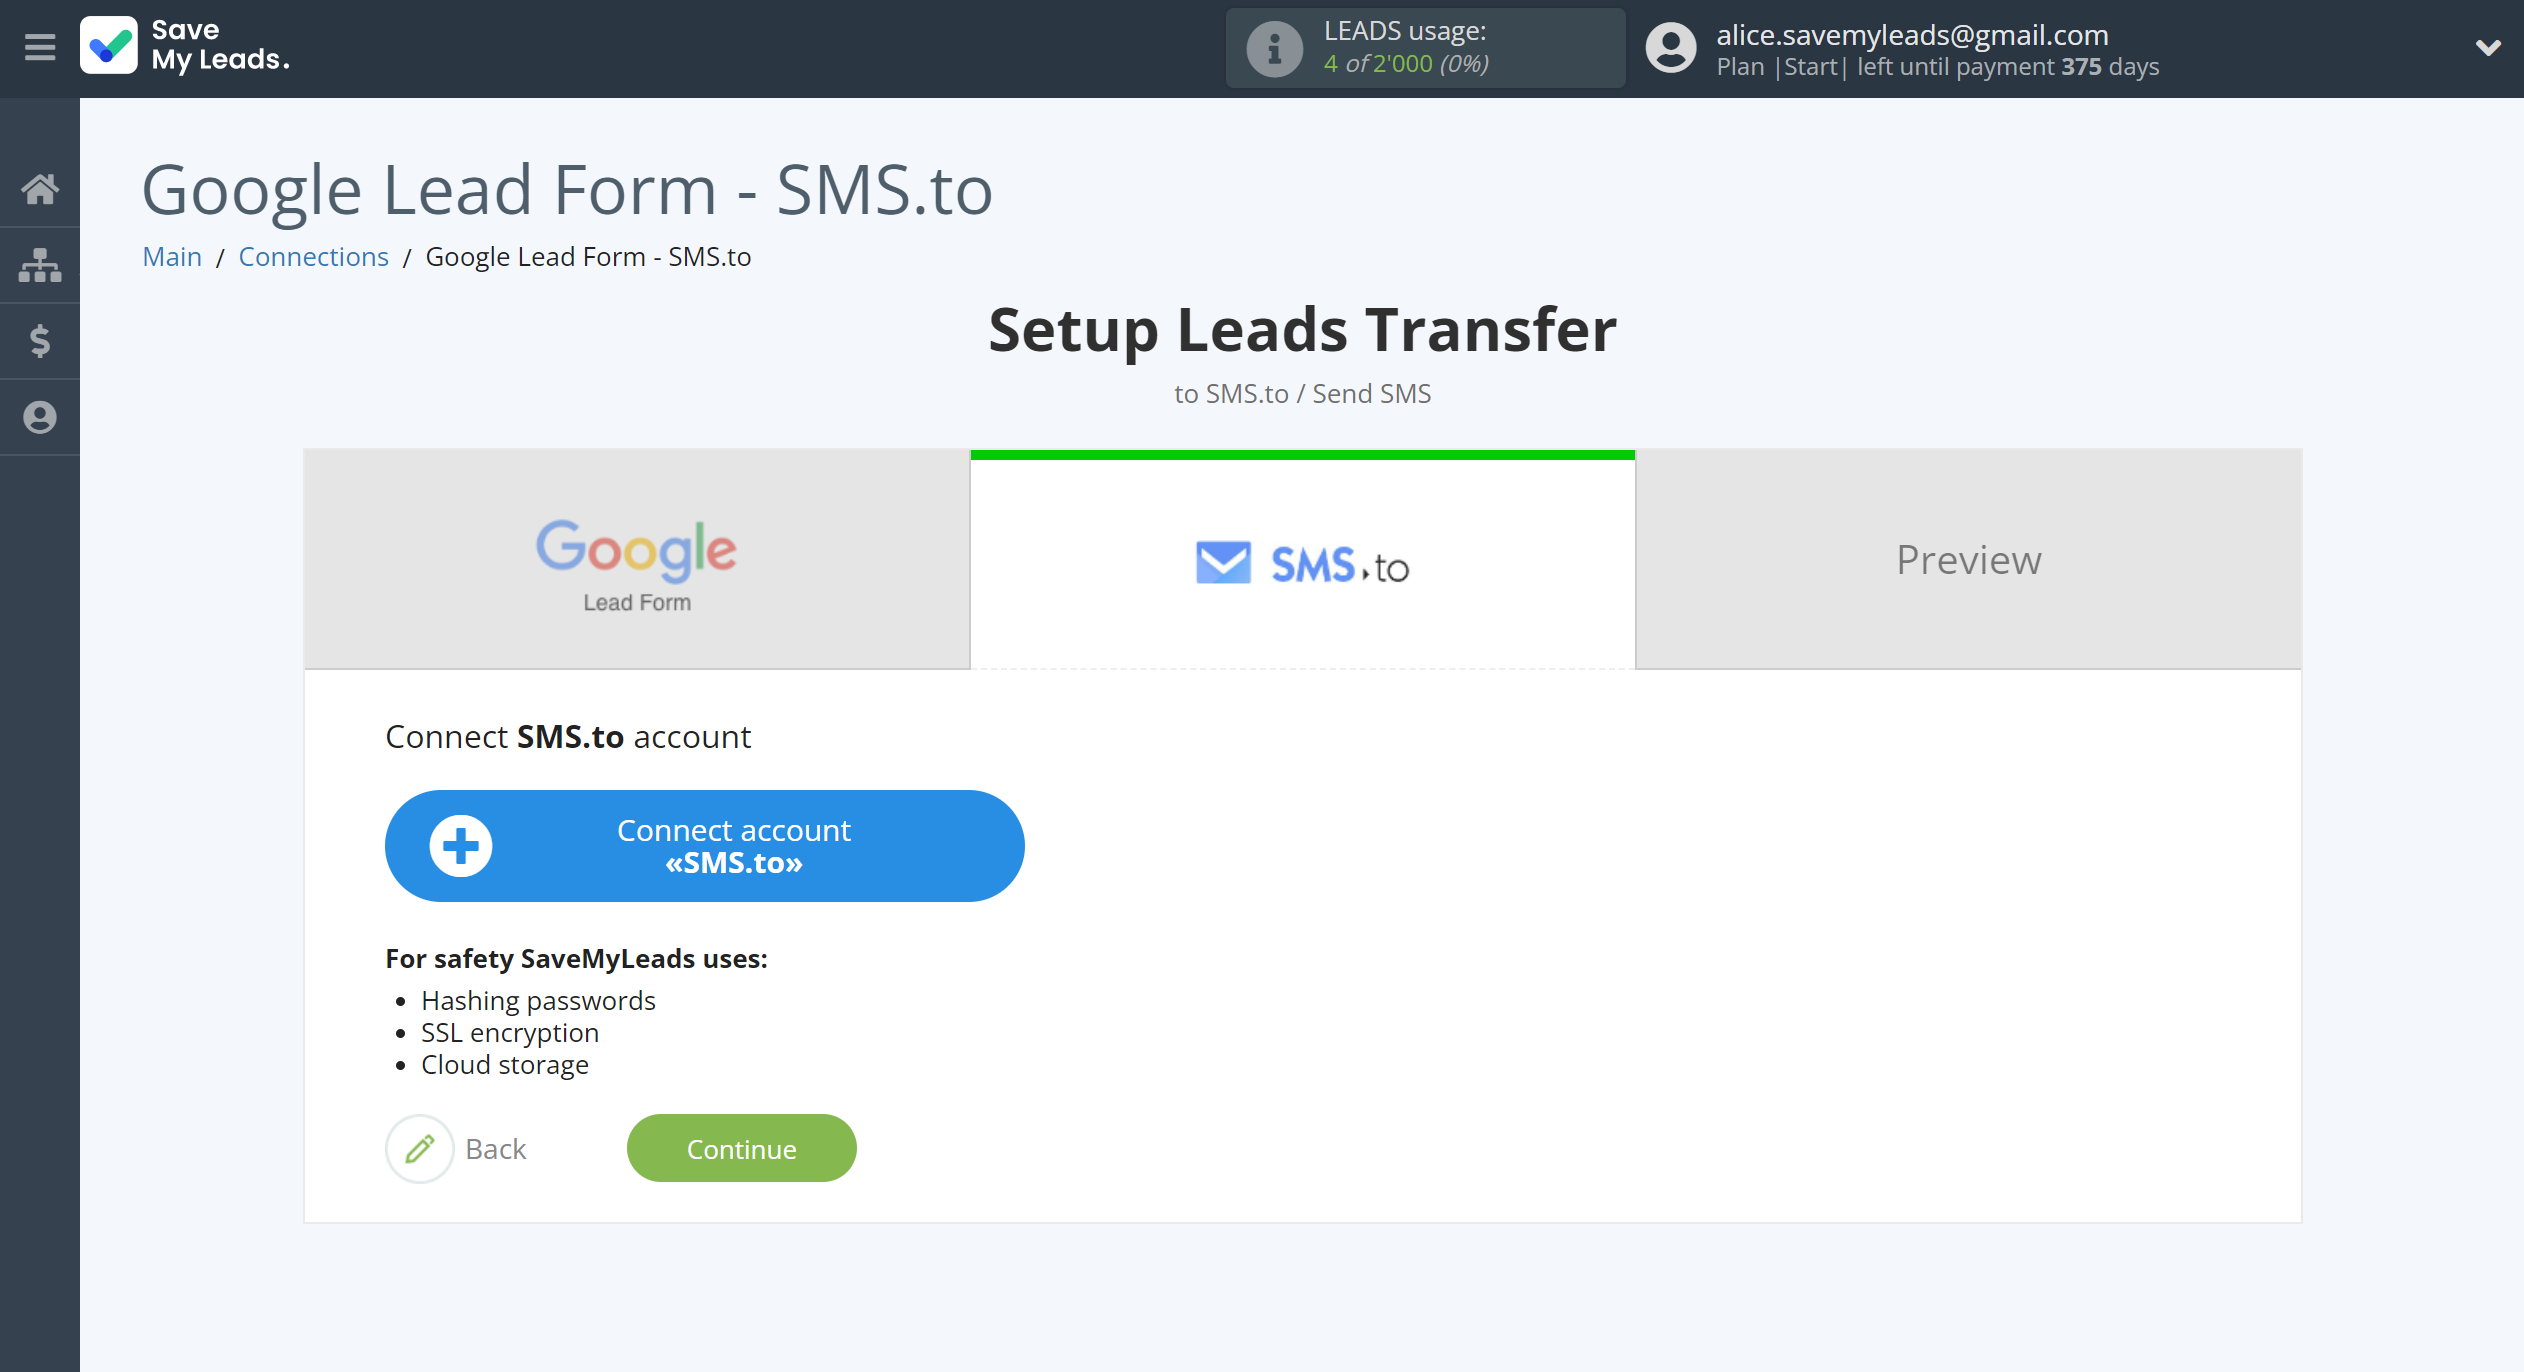 How to Connect Google Lead Form with SMS.to | Data Destination account connection